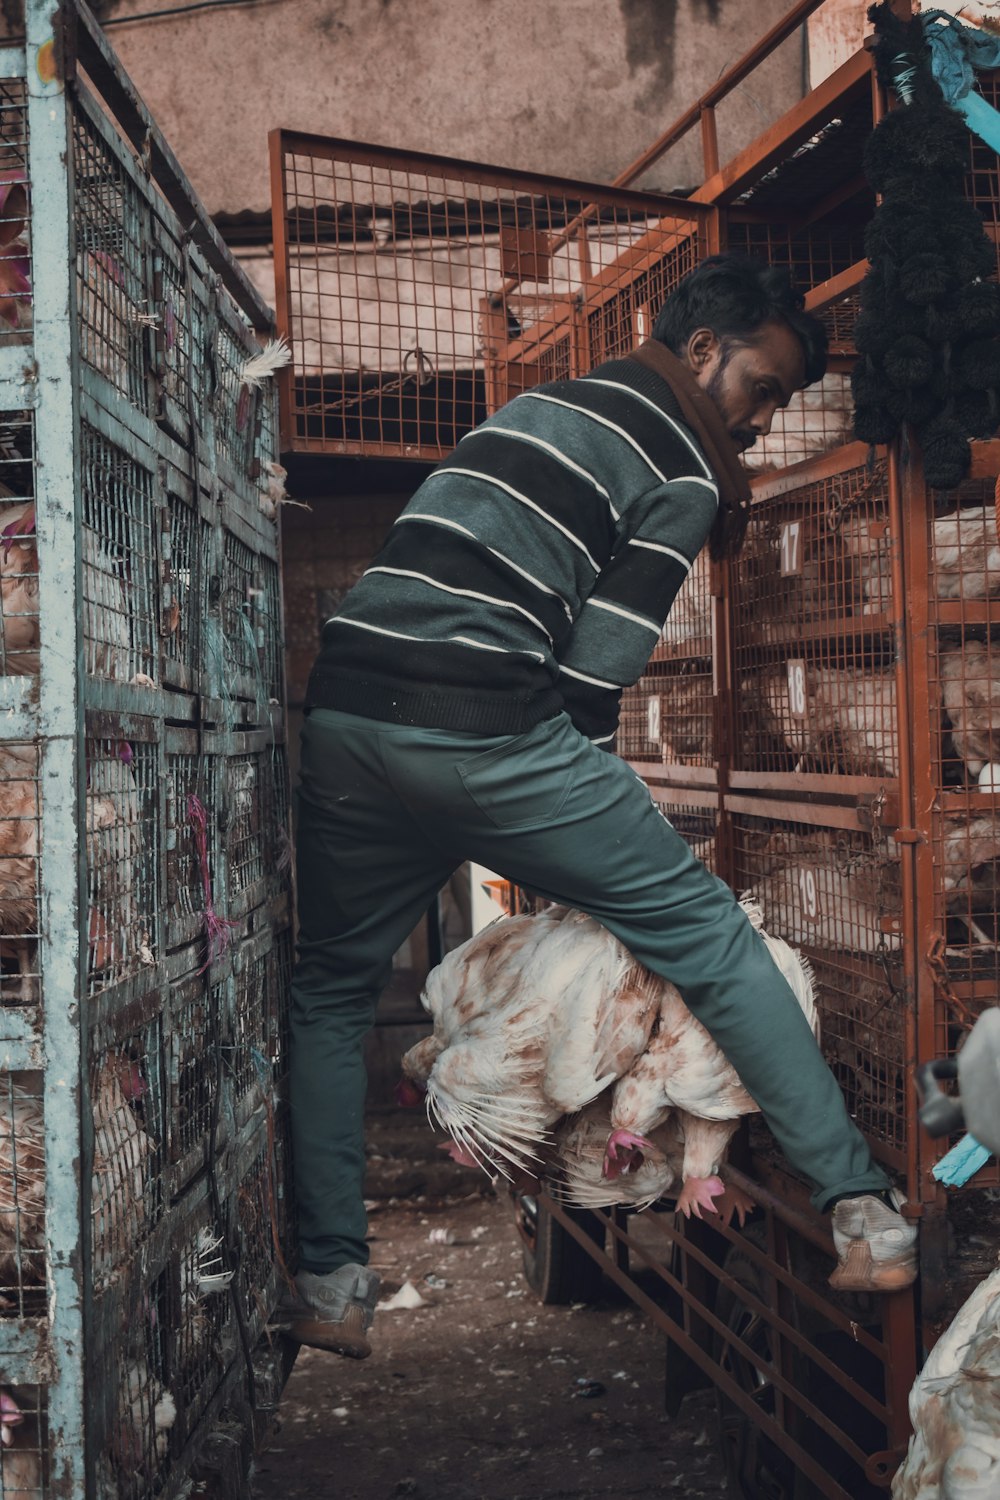 a man standing on top of a cage filled with chickens